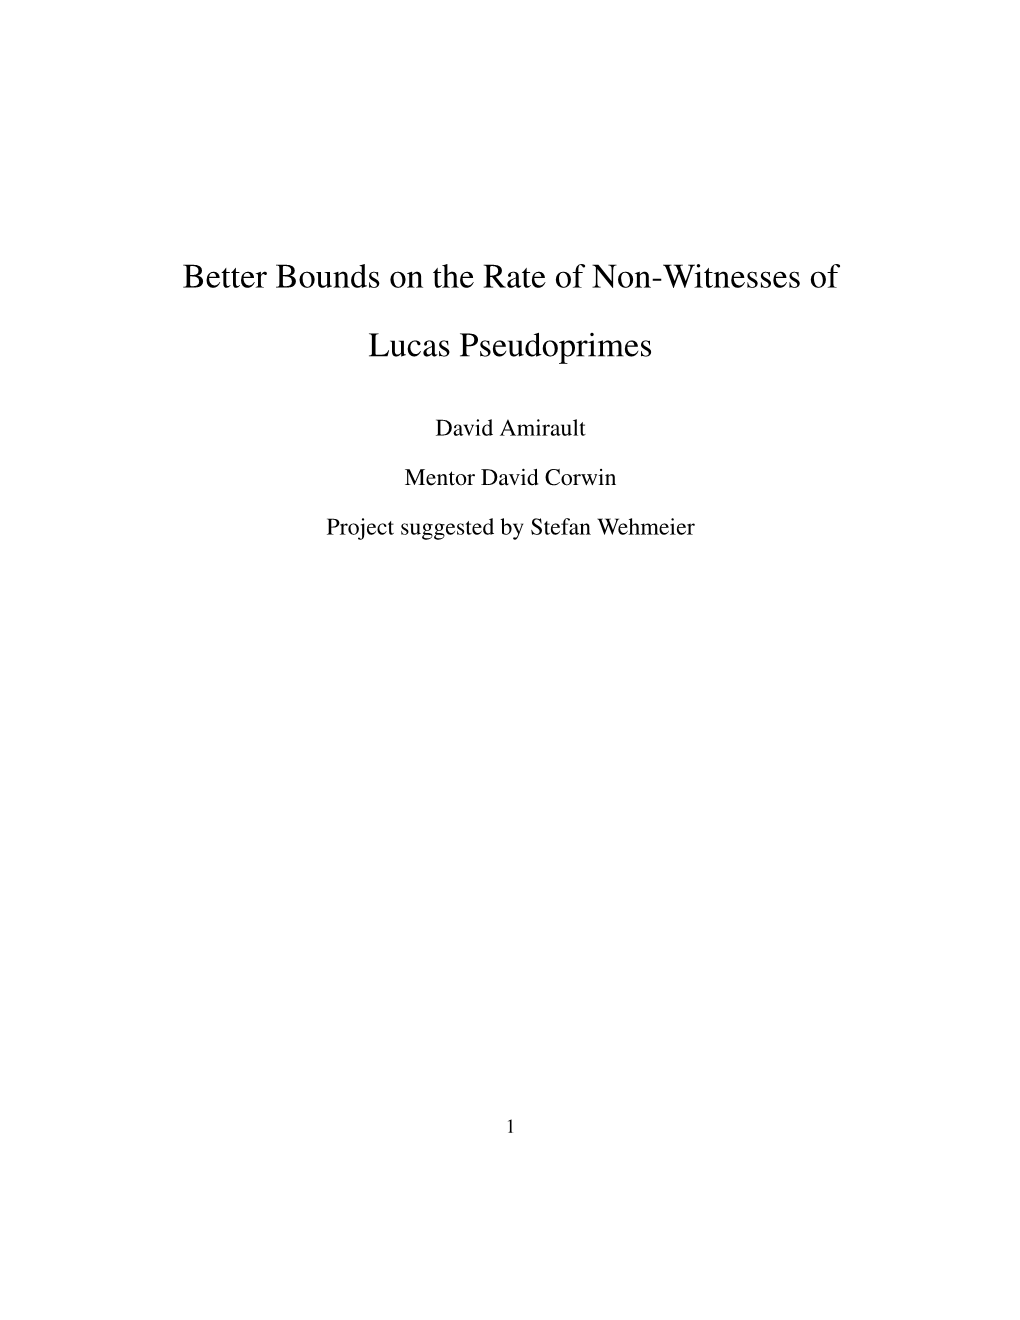 Better Bounds on the Rate of Non-Witnesses of Lucas Pseudoprimes